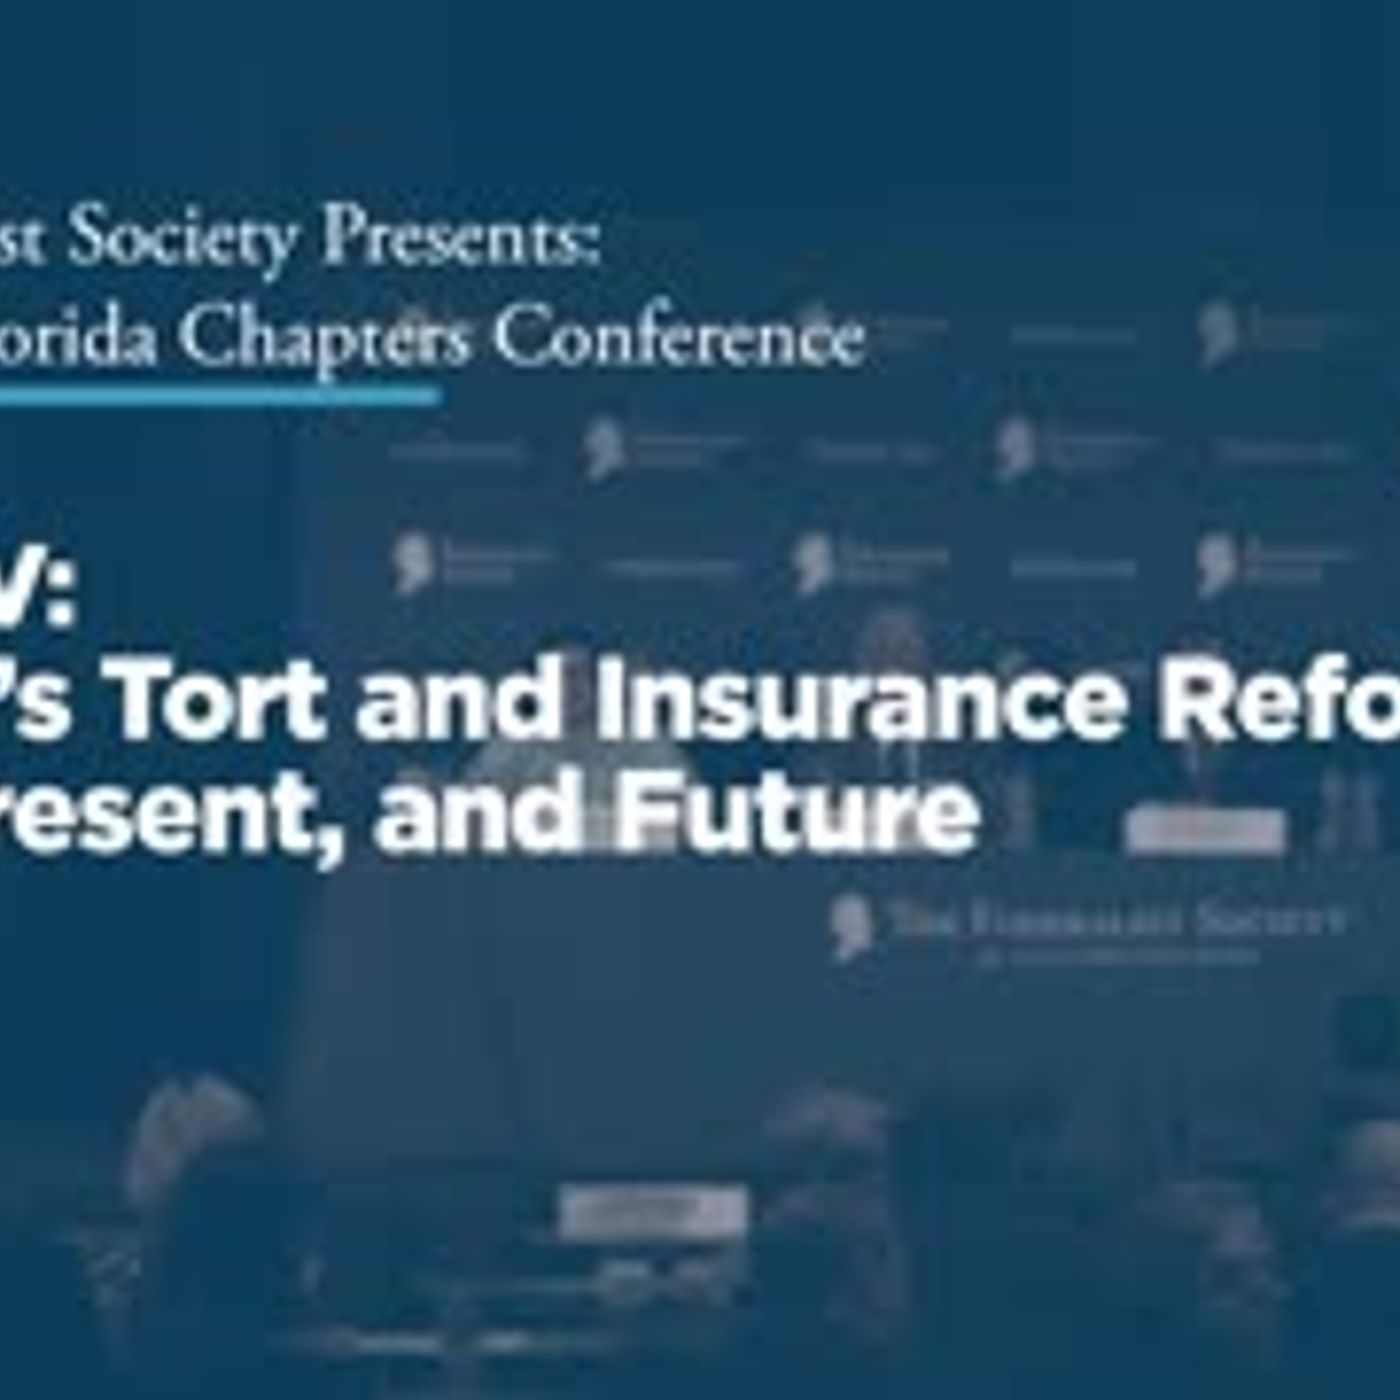 Panel IV: Florida’s Tort and Insurance Reform: Past, Present, and Future